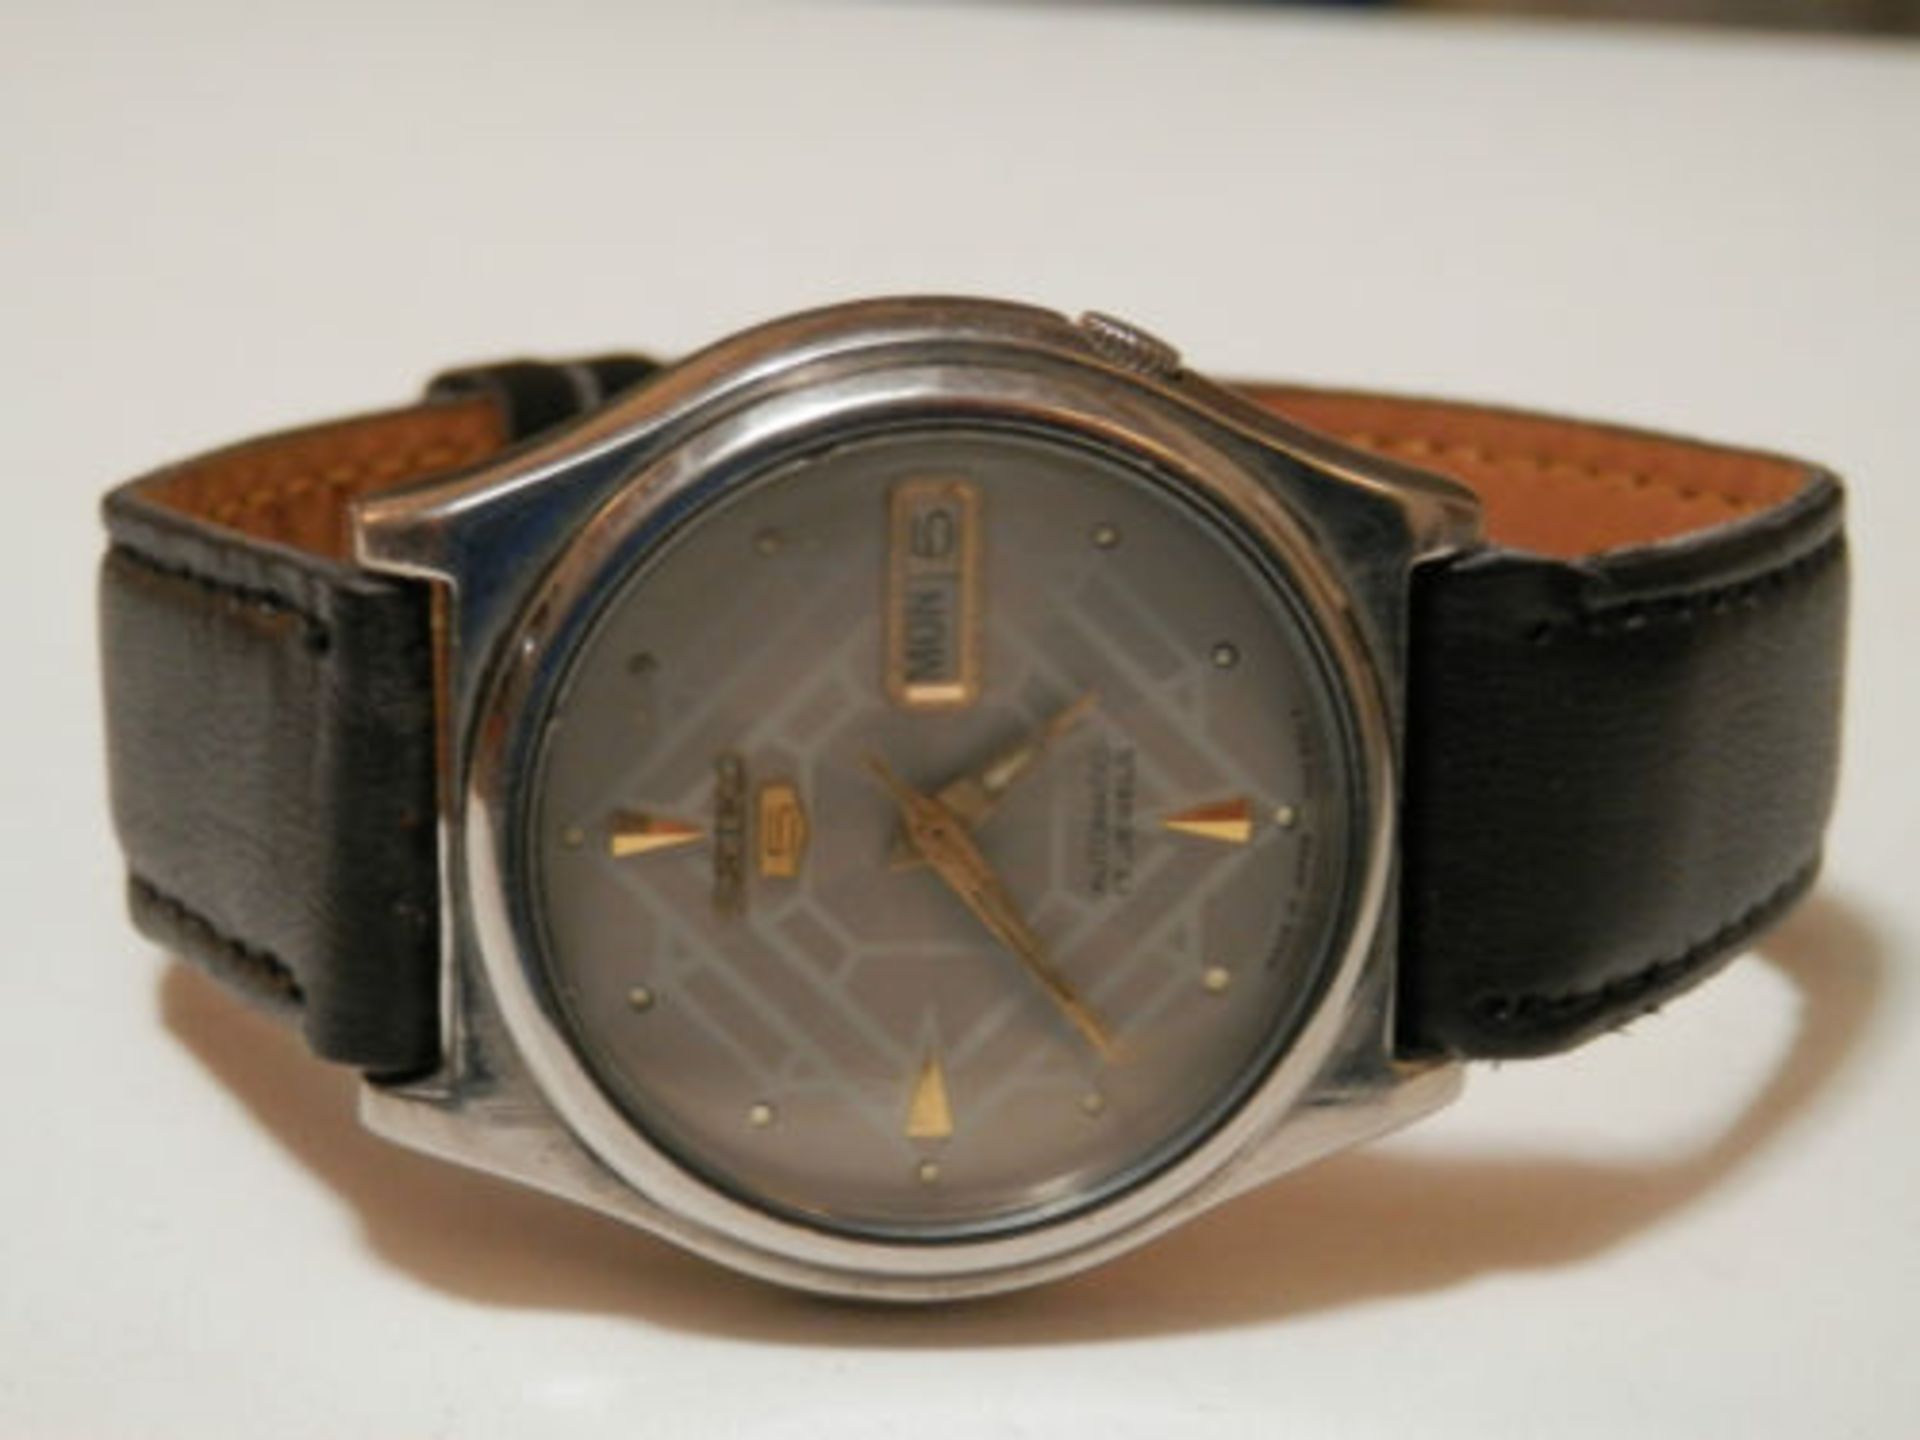 1984 WORKING SEIKO 7009 AUTOMATIC 17 JEWEL DAY/DATE WATCH, STAINLESS CASE. - Image 18 of 18